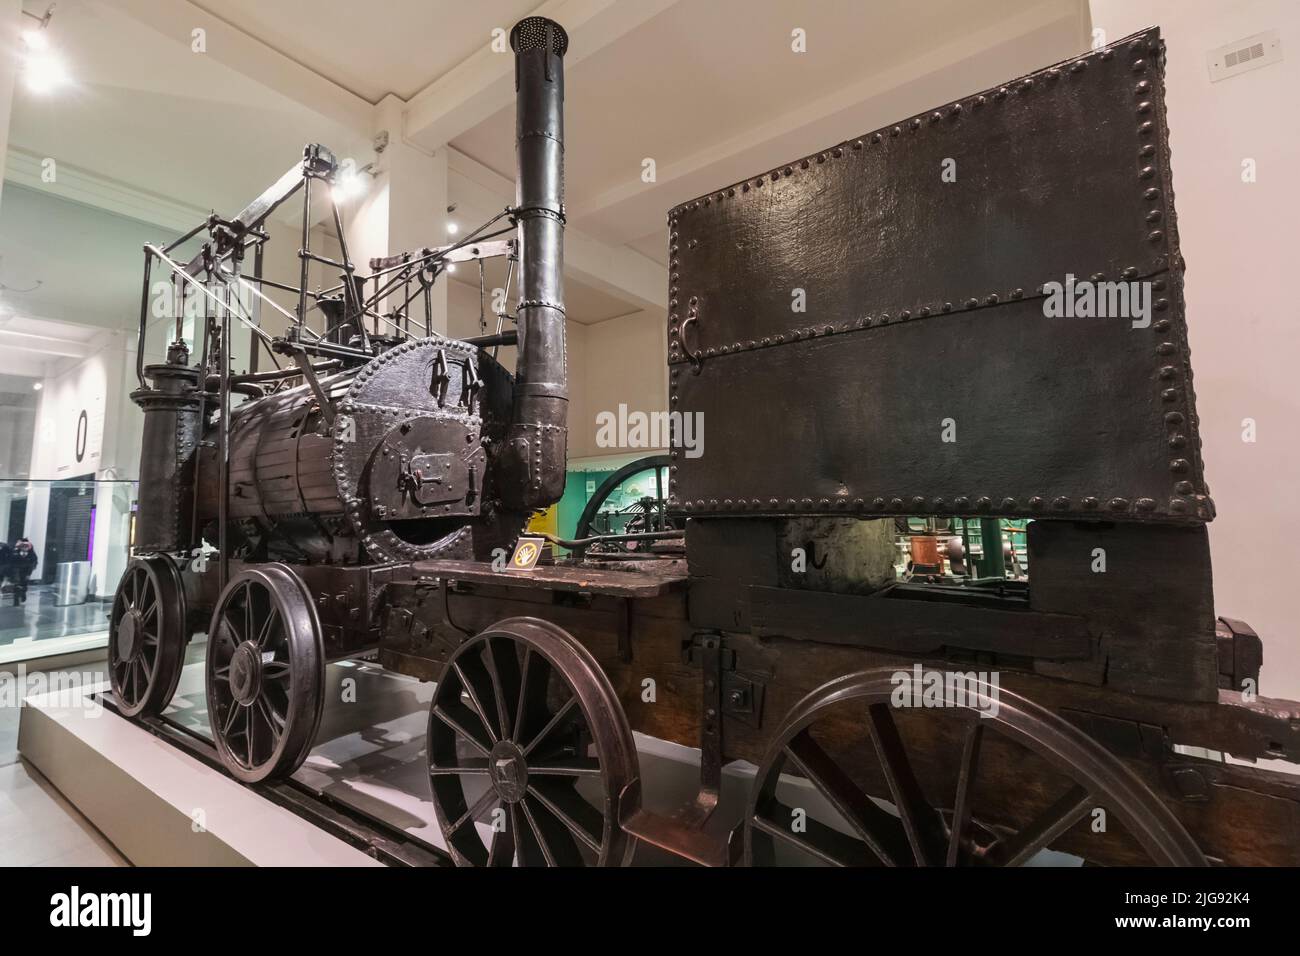 England, London, South Kensington, Science Museum, Exhibit of Puffing Billy Locomotive, The oldest Surviving Steam Railway Locomotive in the World dated 1814 Stock Photo